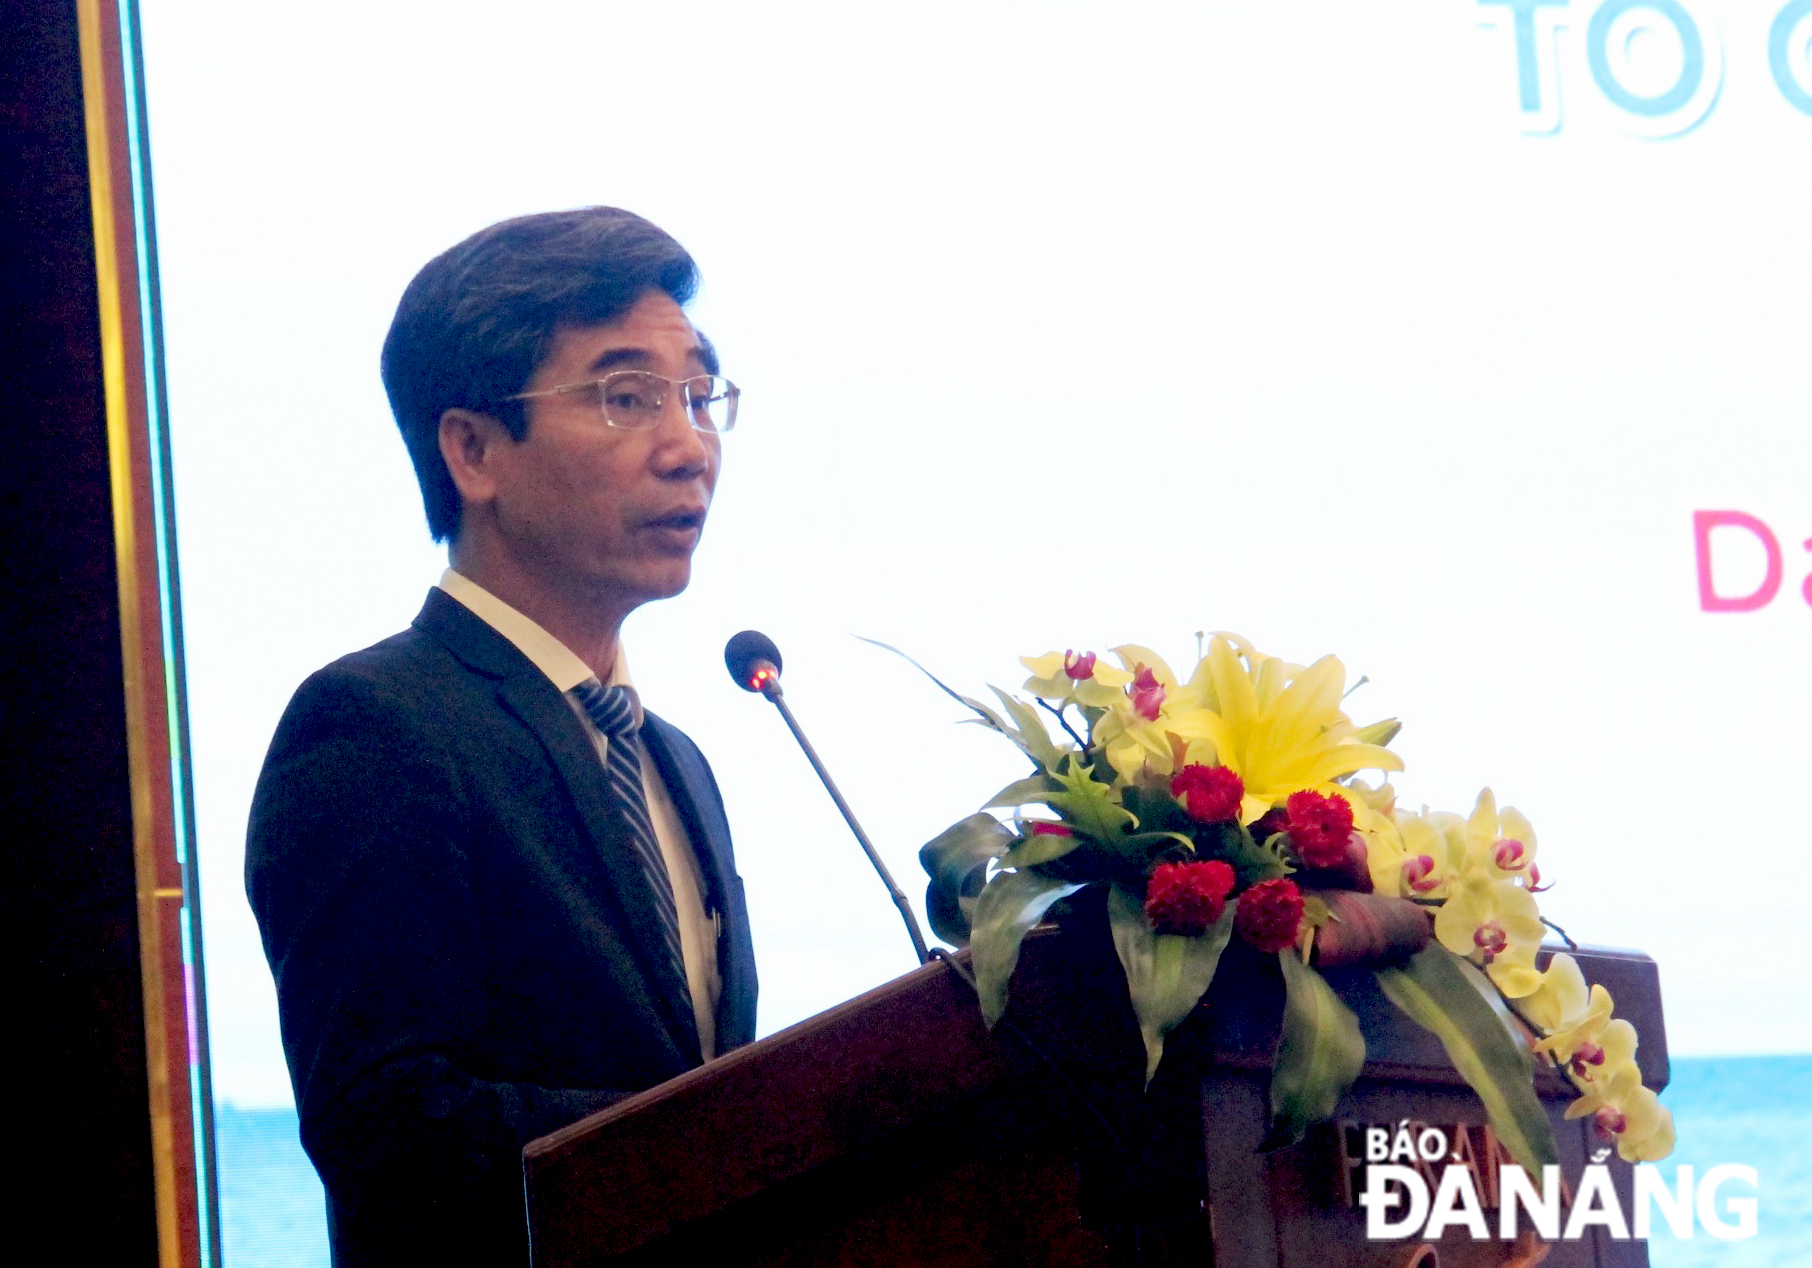  Vice Chairman of the Da Nang People's Committee Tran Chi Cuong speaking at the opening ceremony of the conference